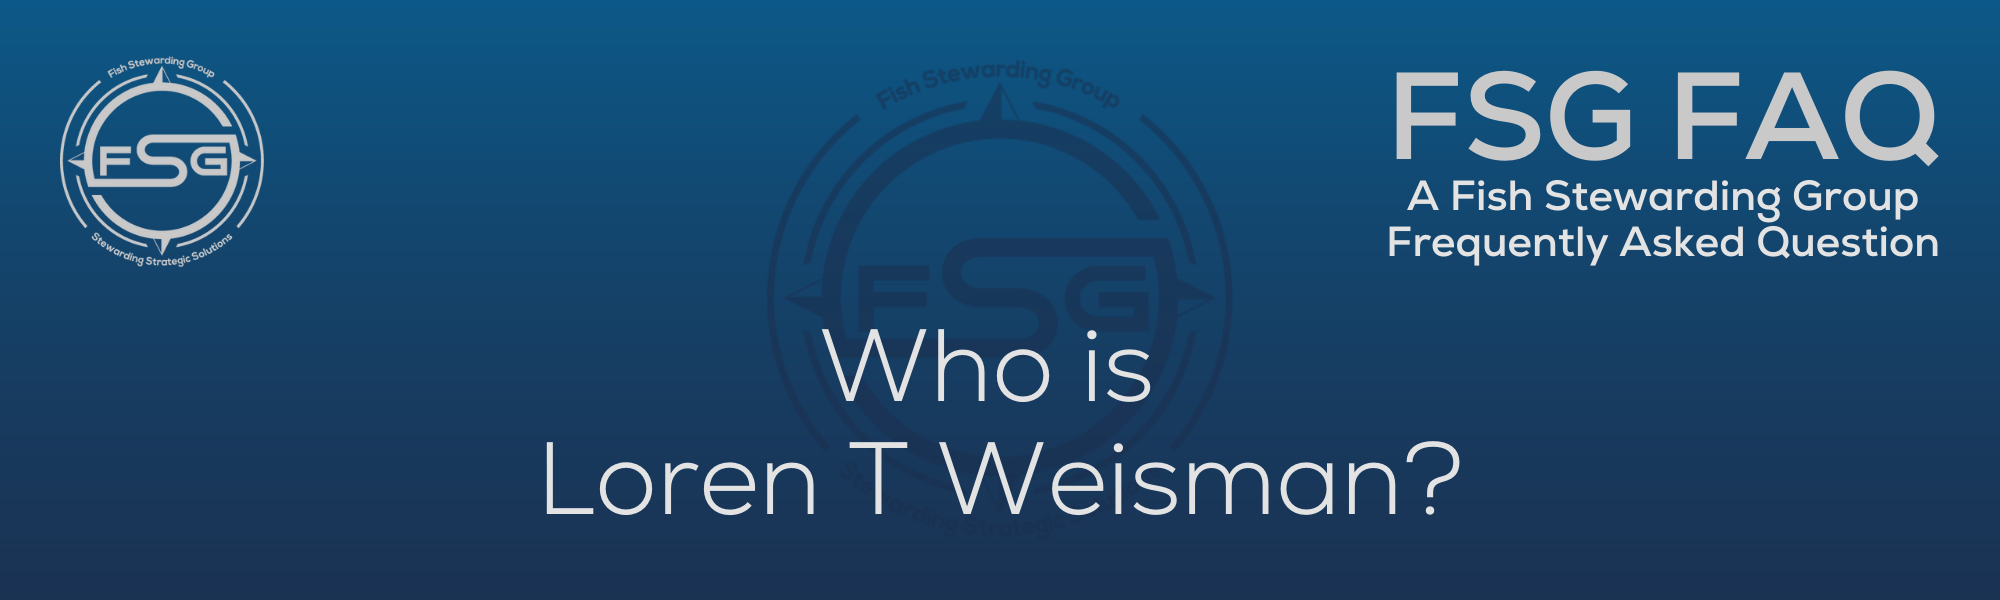 A rectangular and long thing Footer FAQ Image on the bottom of the Who is Loren T Weisman? Page on the website. The background is a blue gradient color that goes from a dark blue on the bottom to a lighter blue on top. The text in lower center of the image in a light gray text that reads: Who is Loren T Weisman? The text in gray in the upper right corner reads: FSG FAQ. Right beneath that is more gray text in a smaller font that reads: A Fish Stewarding Group Frequently Asked Question. On the upper left side is the FSG Logo in gray. The logo has the letters FSG in the middle with a circle with four pointed arrows facing north, south, east and west with the S connected to that circle. Four rounded lines make the next circle of the circle and the last layer is a thin circle with the text on the Bottom that reads Stewarding Strategist Solutions and on top, the text reads Fish Stewarding Group. And Lastly in the center background of the image is a watermarked FSG logo, faded in blue, in the background.